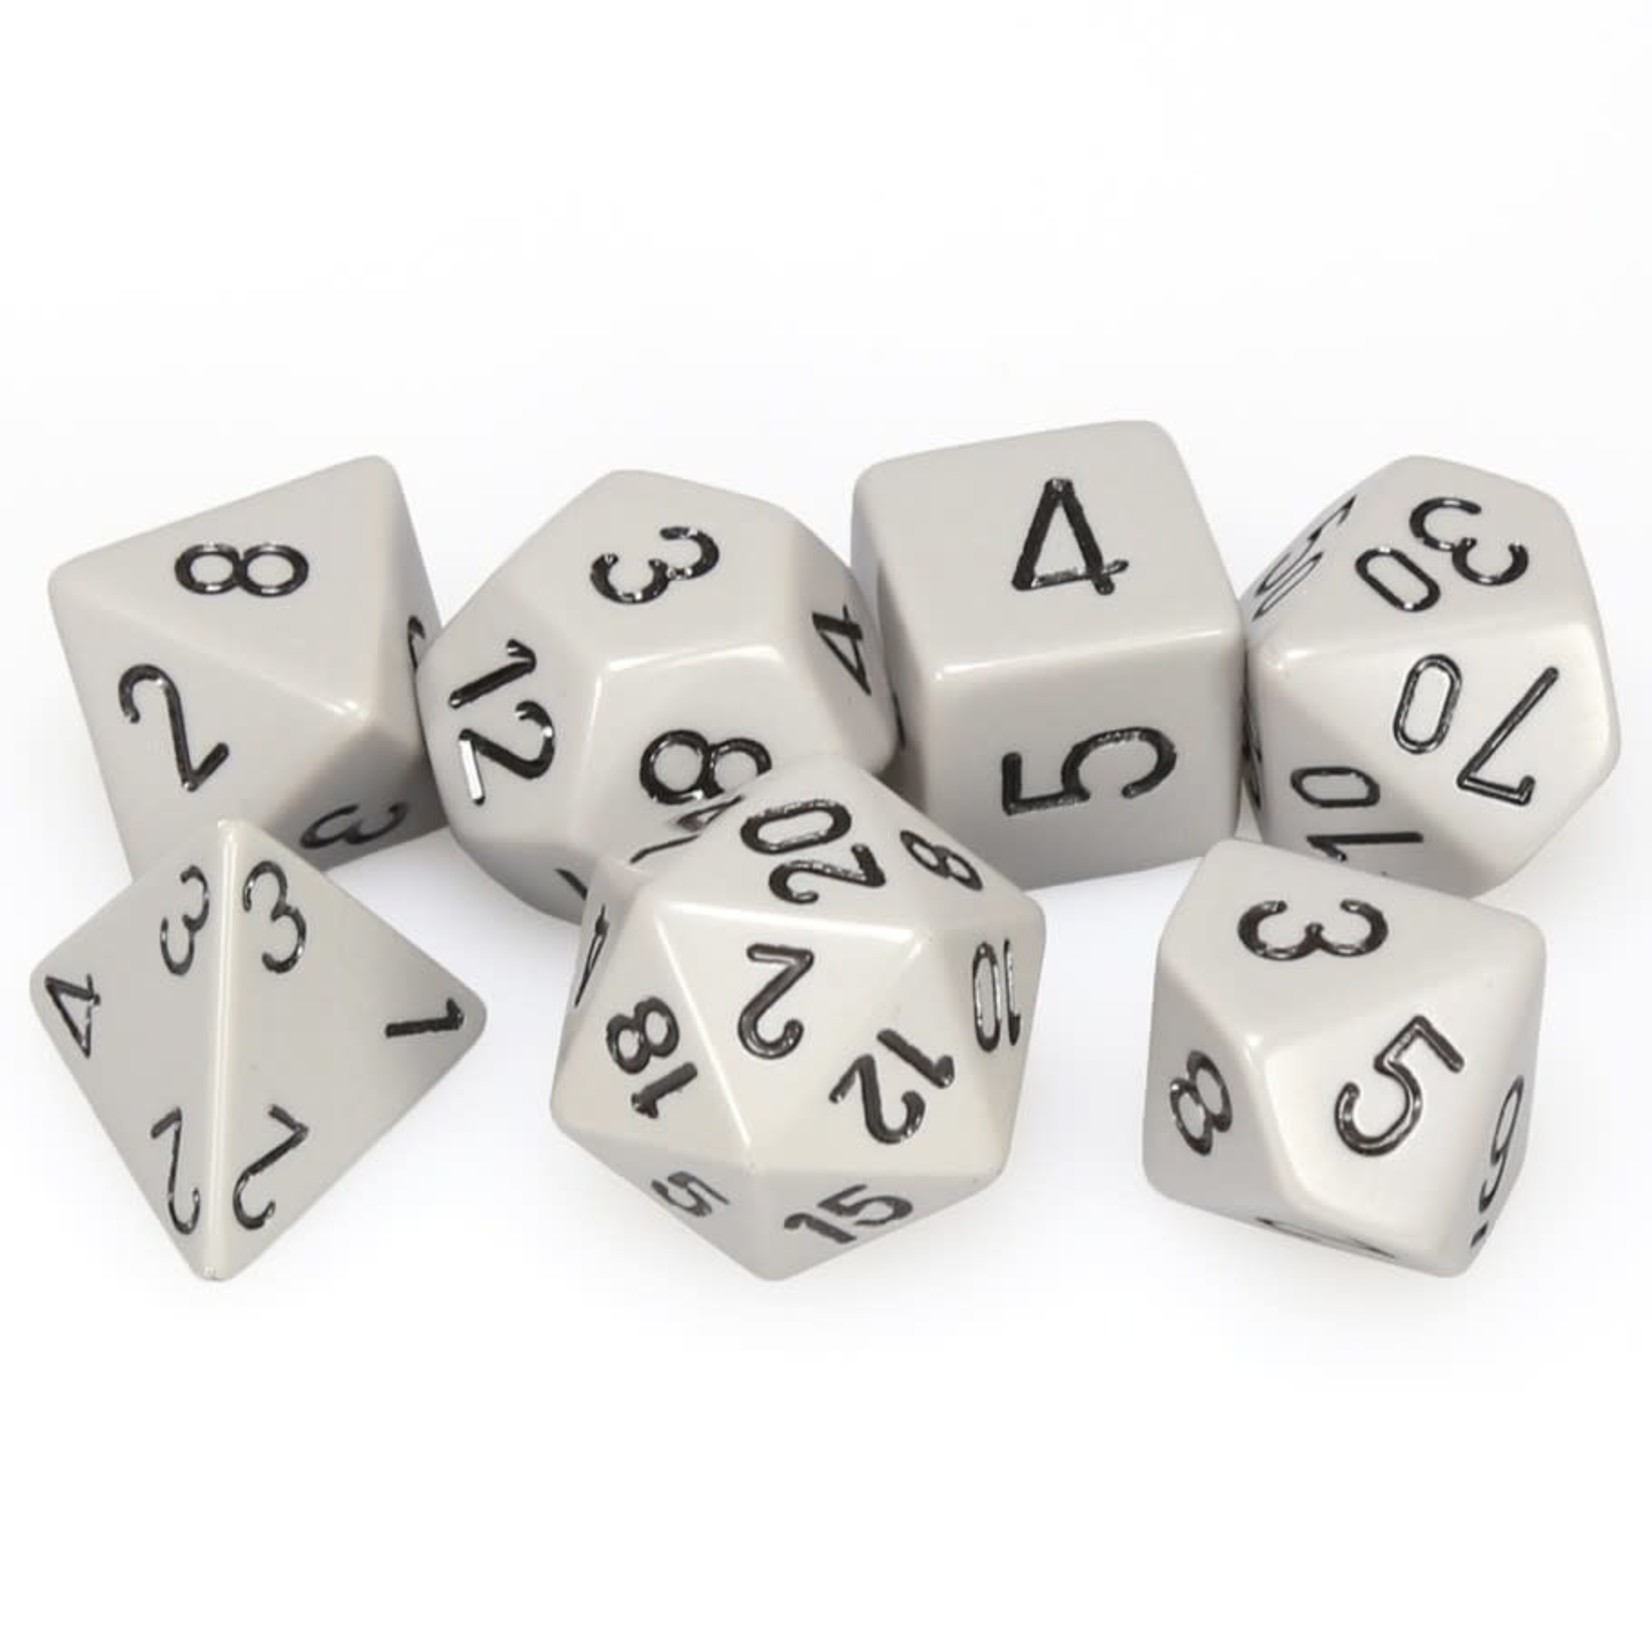 Chessex Opaque Polyhedral 7-Die Set: Grey with black